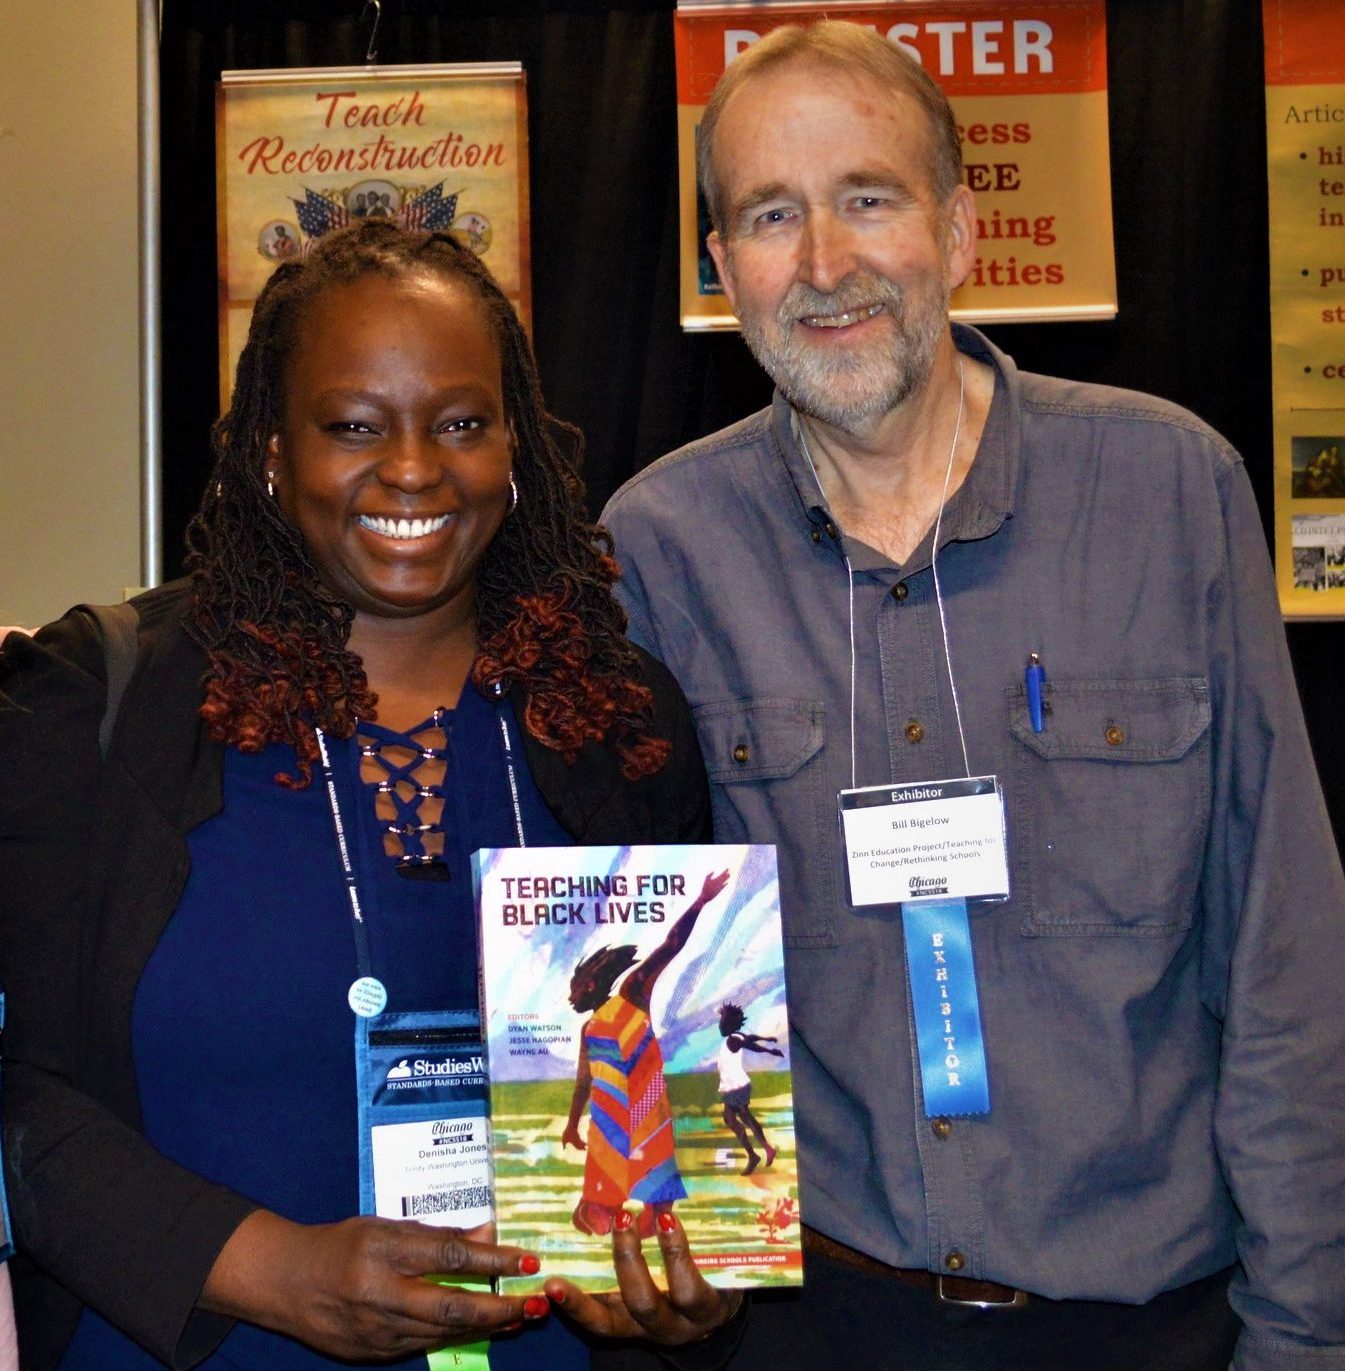 Bill Bigelow and two women at NCSS Chicago 2018 smiling, pose with the book Teaching For Black Lives.